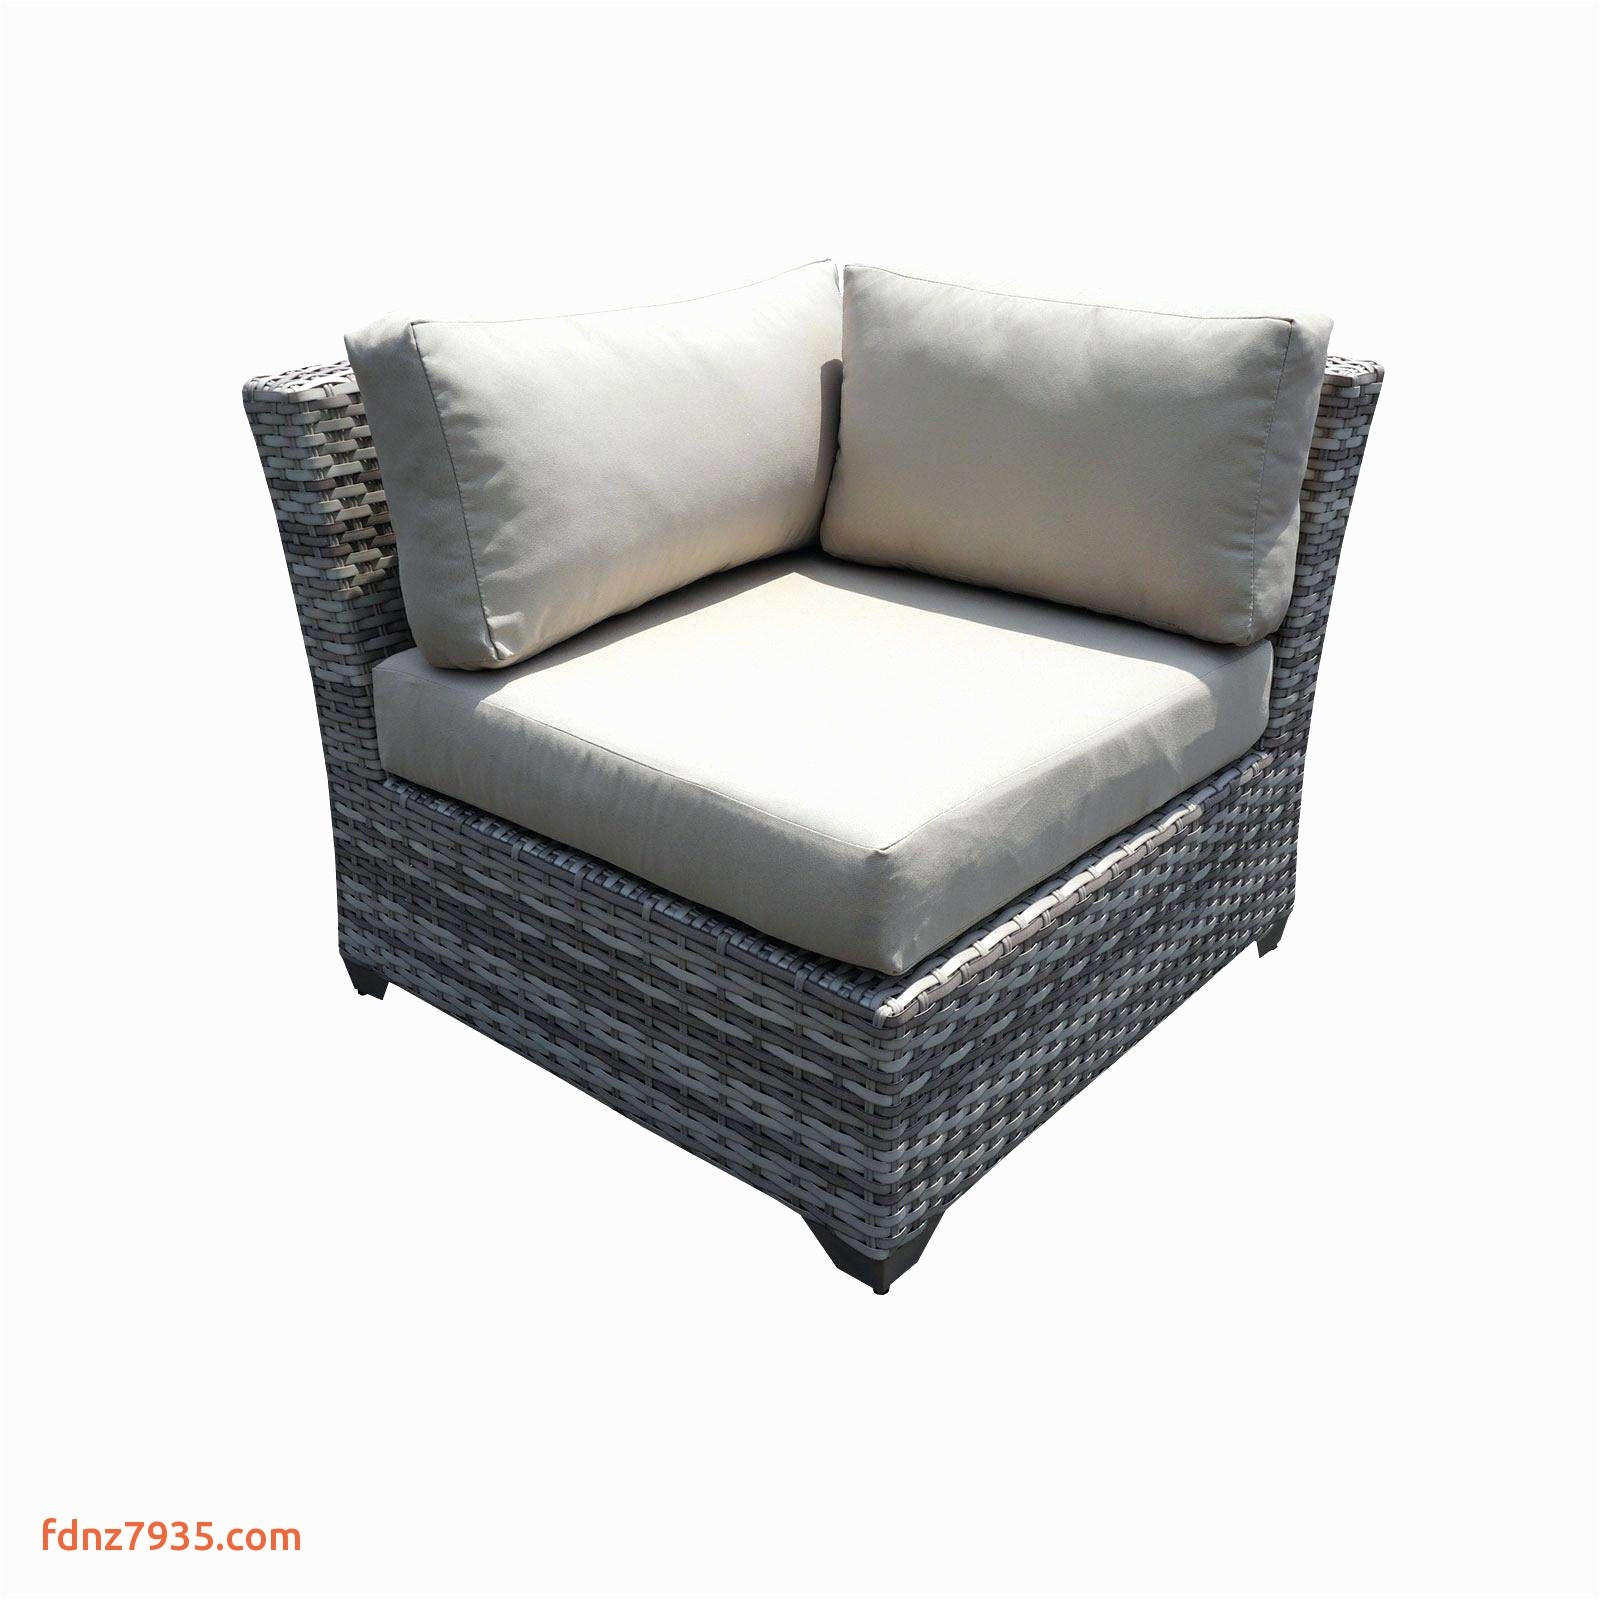 lawn furniture cushions awesome wicker outdoor sofa 0d patio chairs scheme replacement cushions for walmart